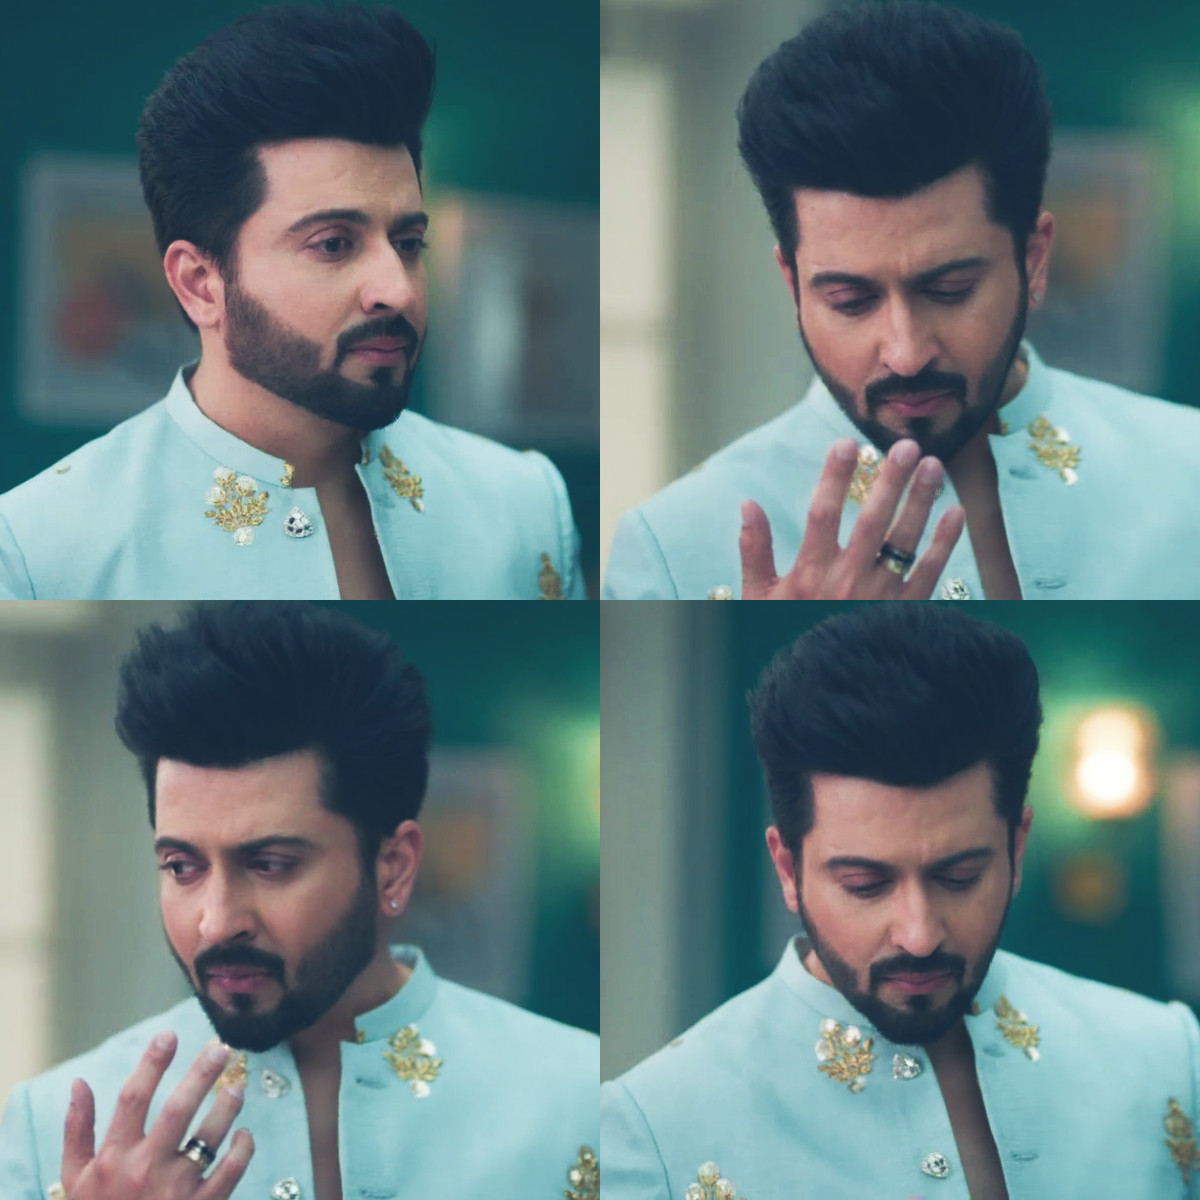 Subhaan Siddiqui's 'What just happened' moment

the conflicting of the heart has started

#DheerajDhoopar #SubhaanSiddiqui #RabbSeHaiDua